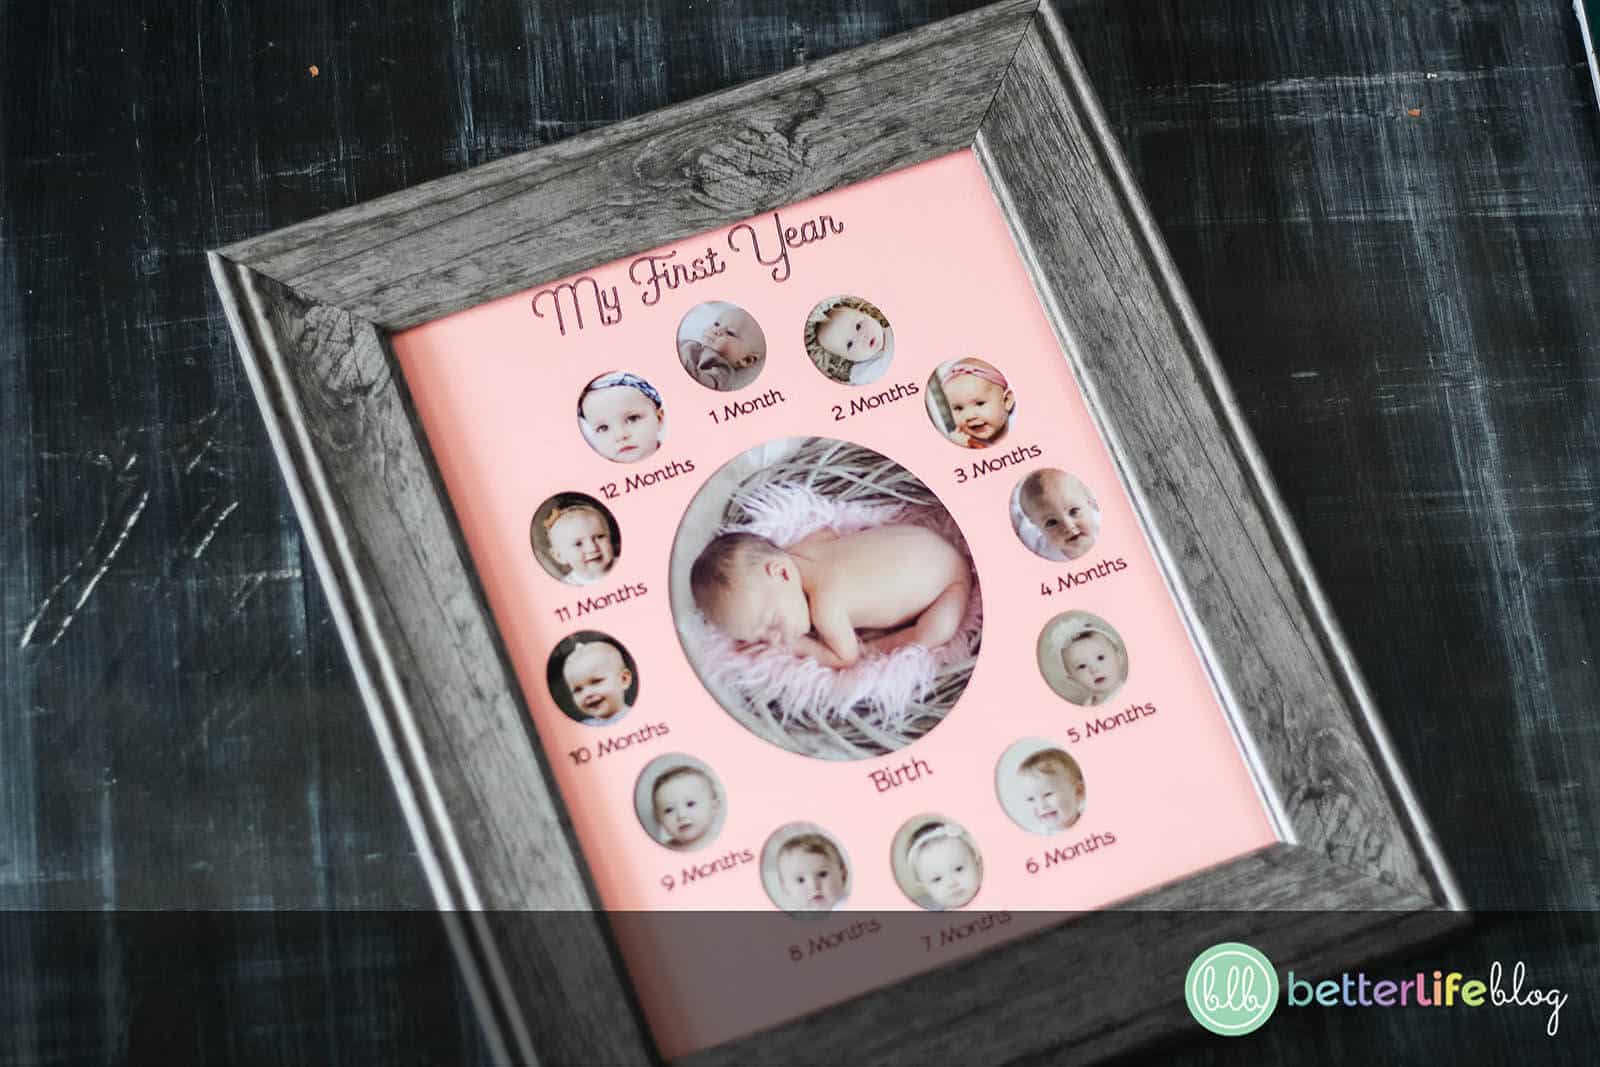 Oh, baby! This Baby Milestone Frame is a gorgeous keepsake that’s handmade with love! Plus, it allows you to enjoy your little ones' cutest snapshots at a glance. Learn how to make one with our easy-to-follow tutorial.